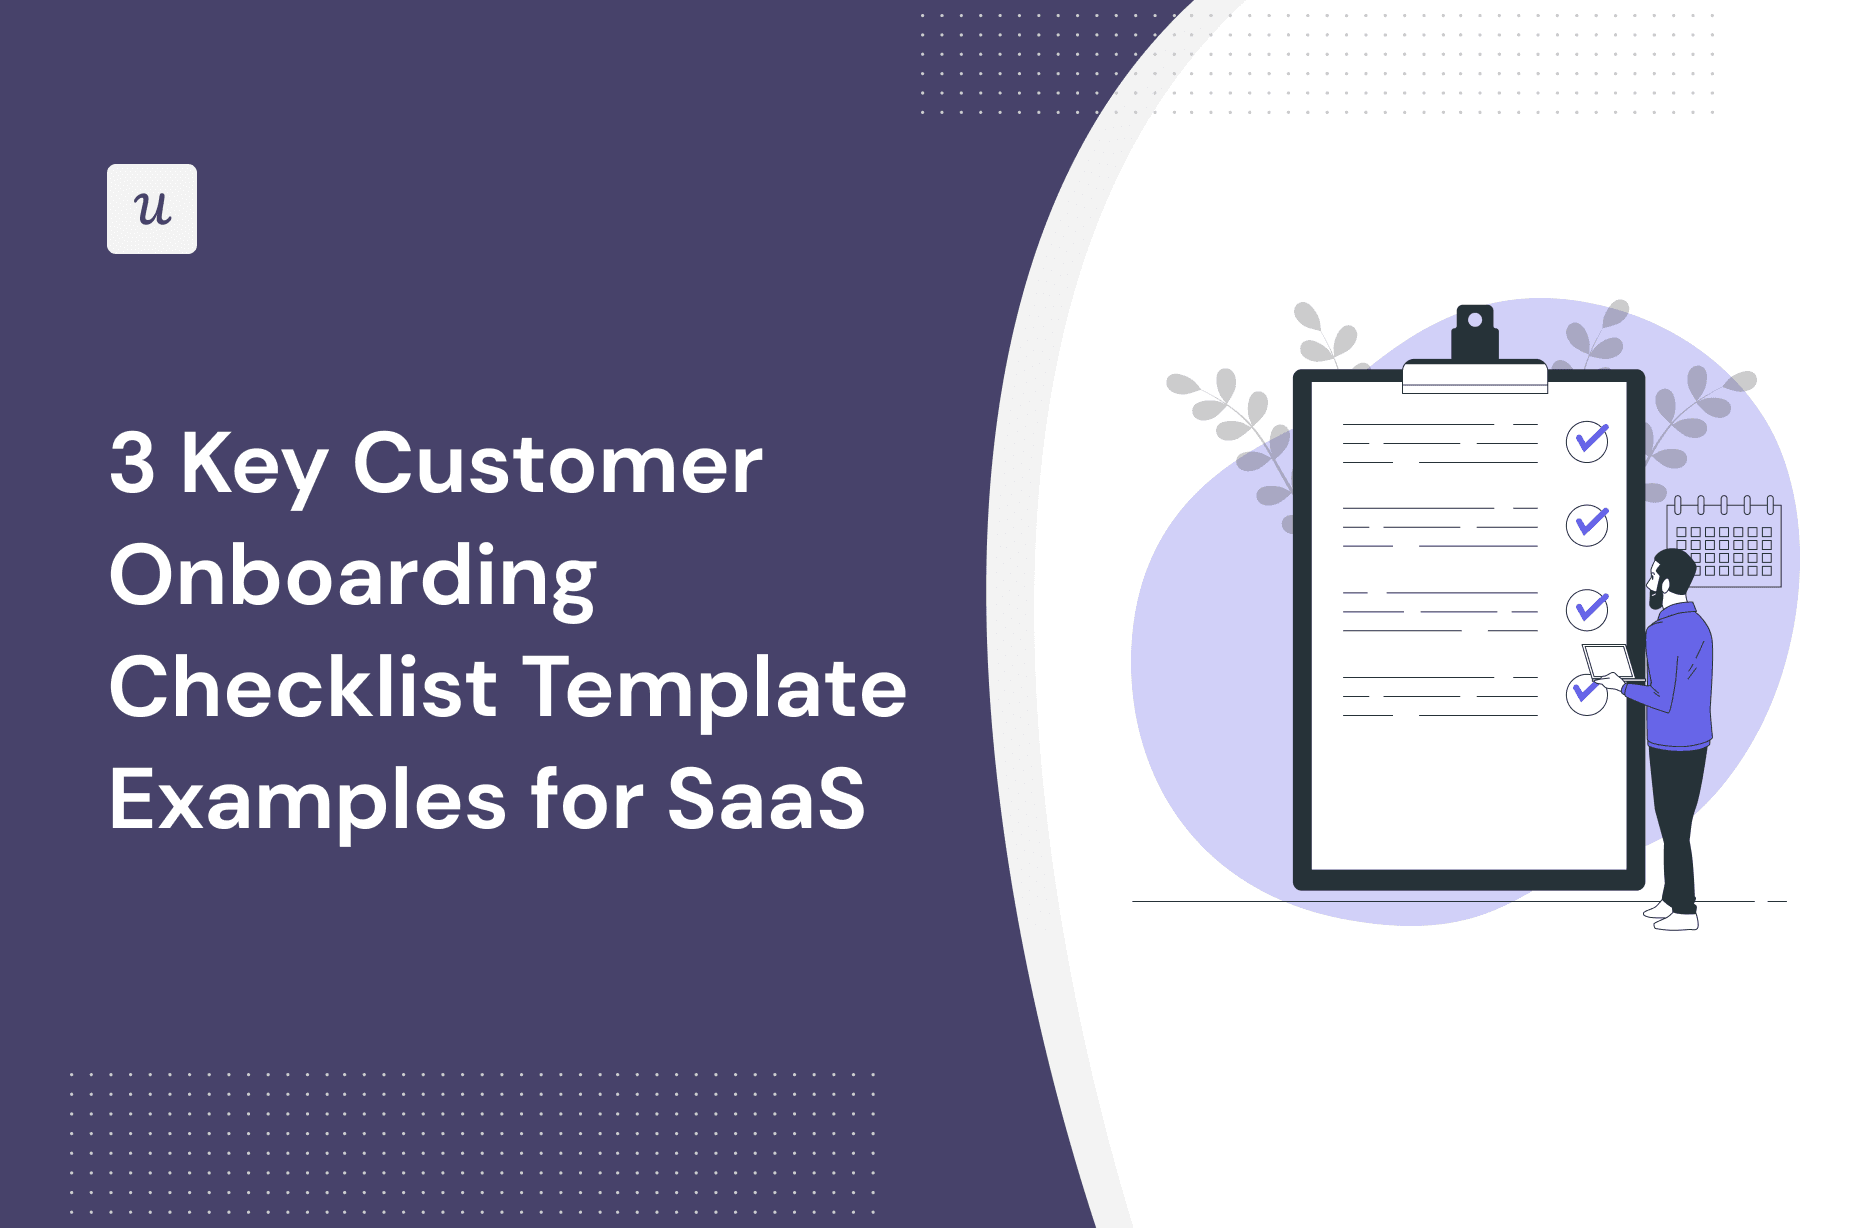 3 Key Customer Onboarding Checklist Template Examples for SaaS cover